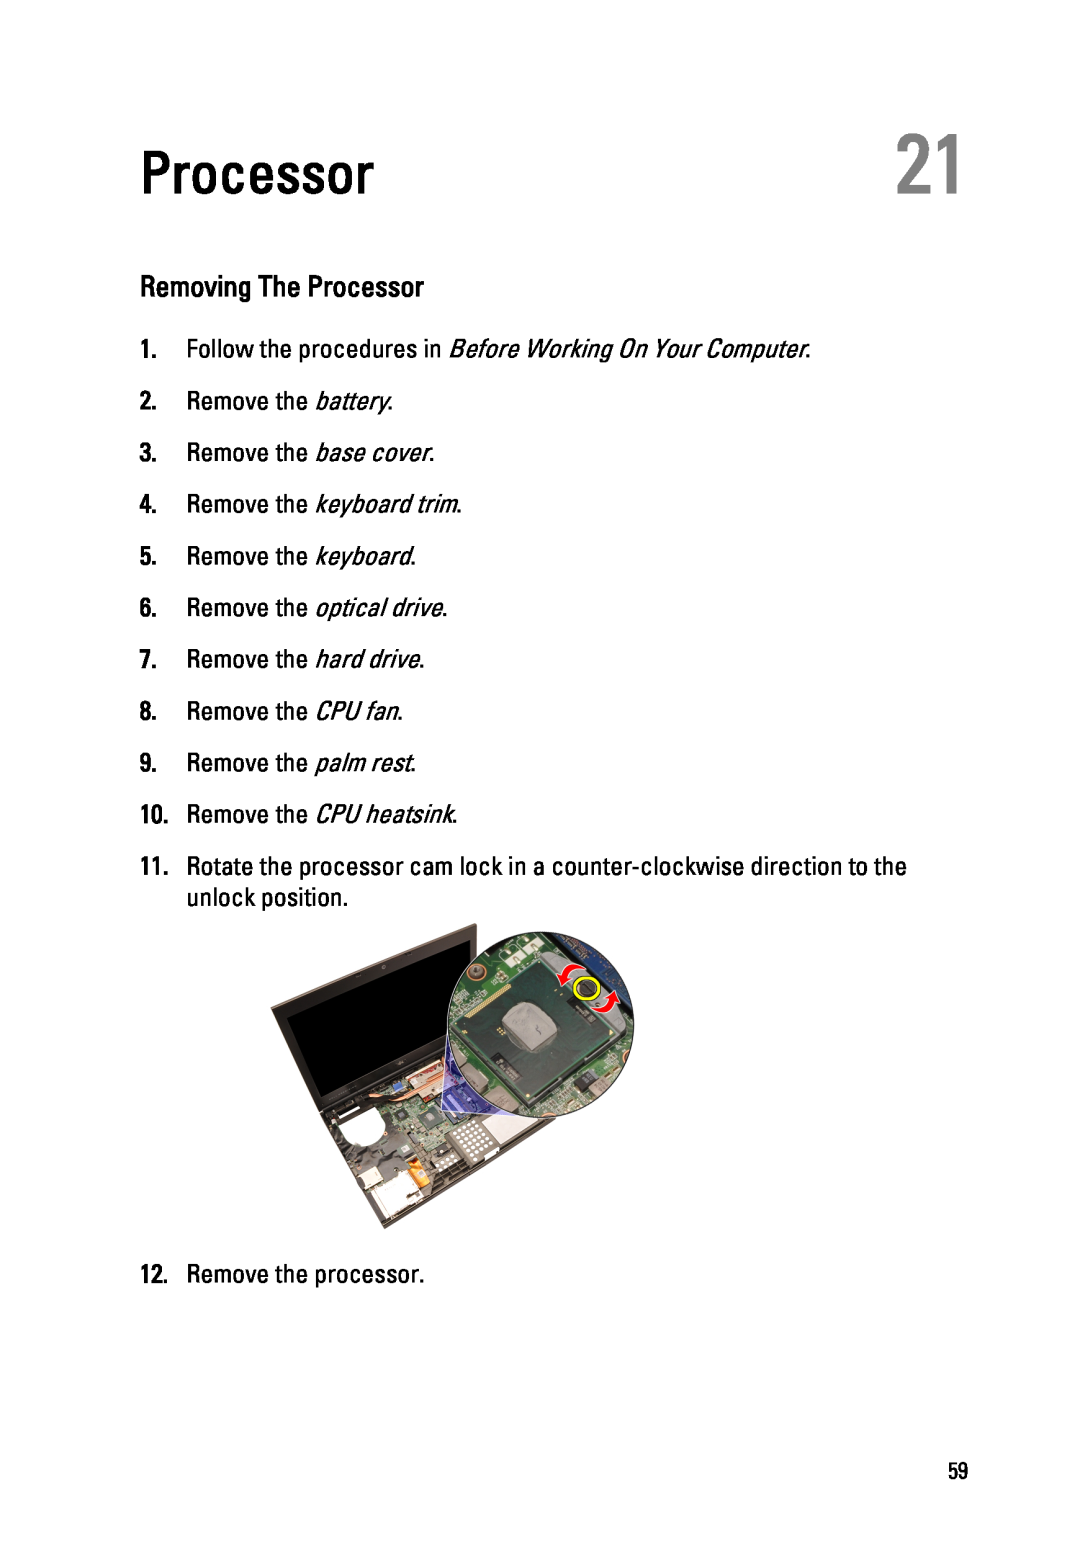 Dell M4600 owner manual Processor21, Removing The Processor, Follow the procedures in Before Working On Your Computer 